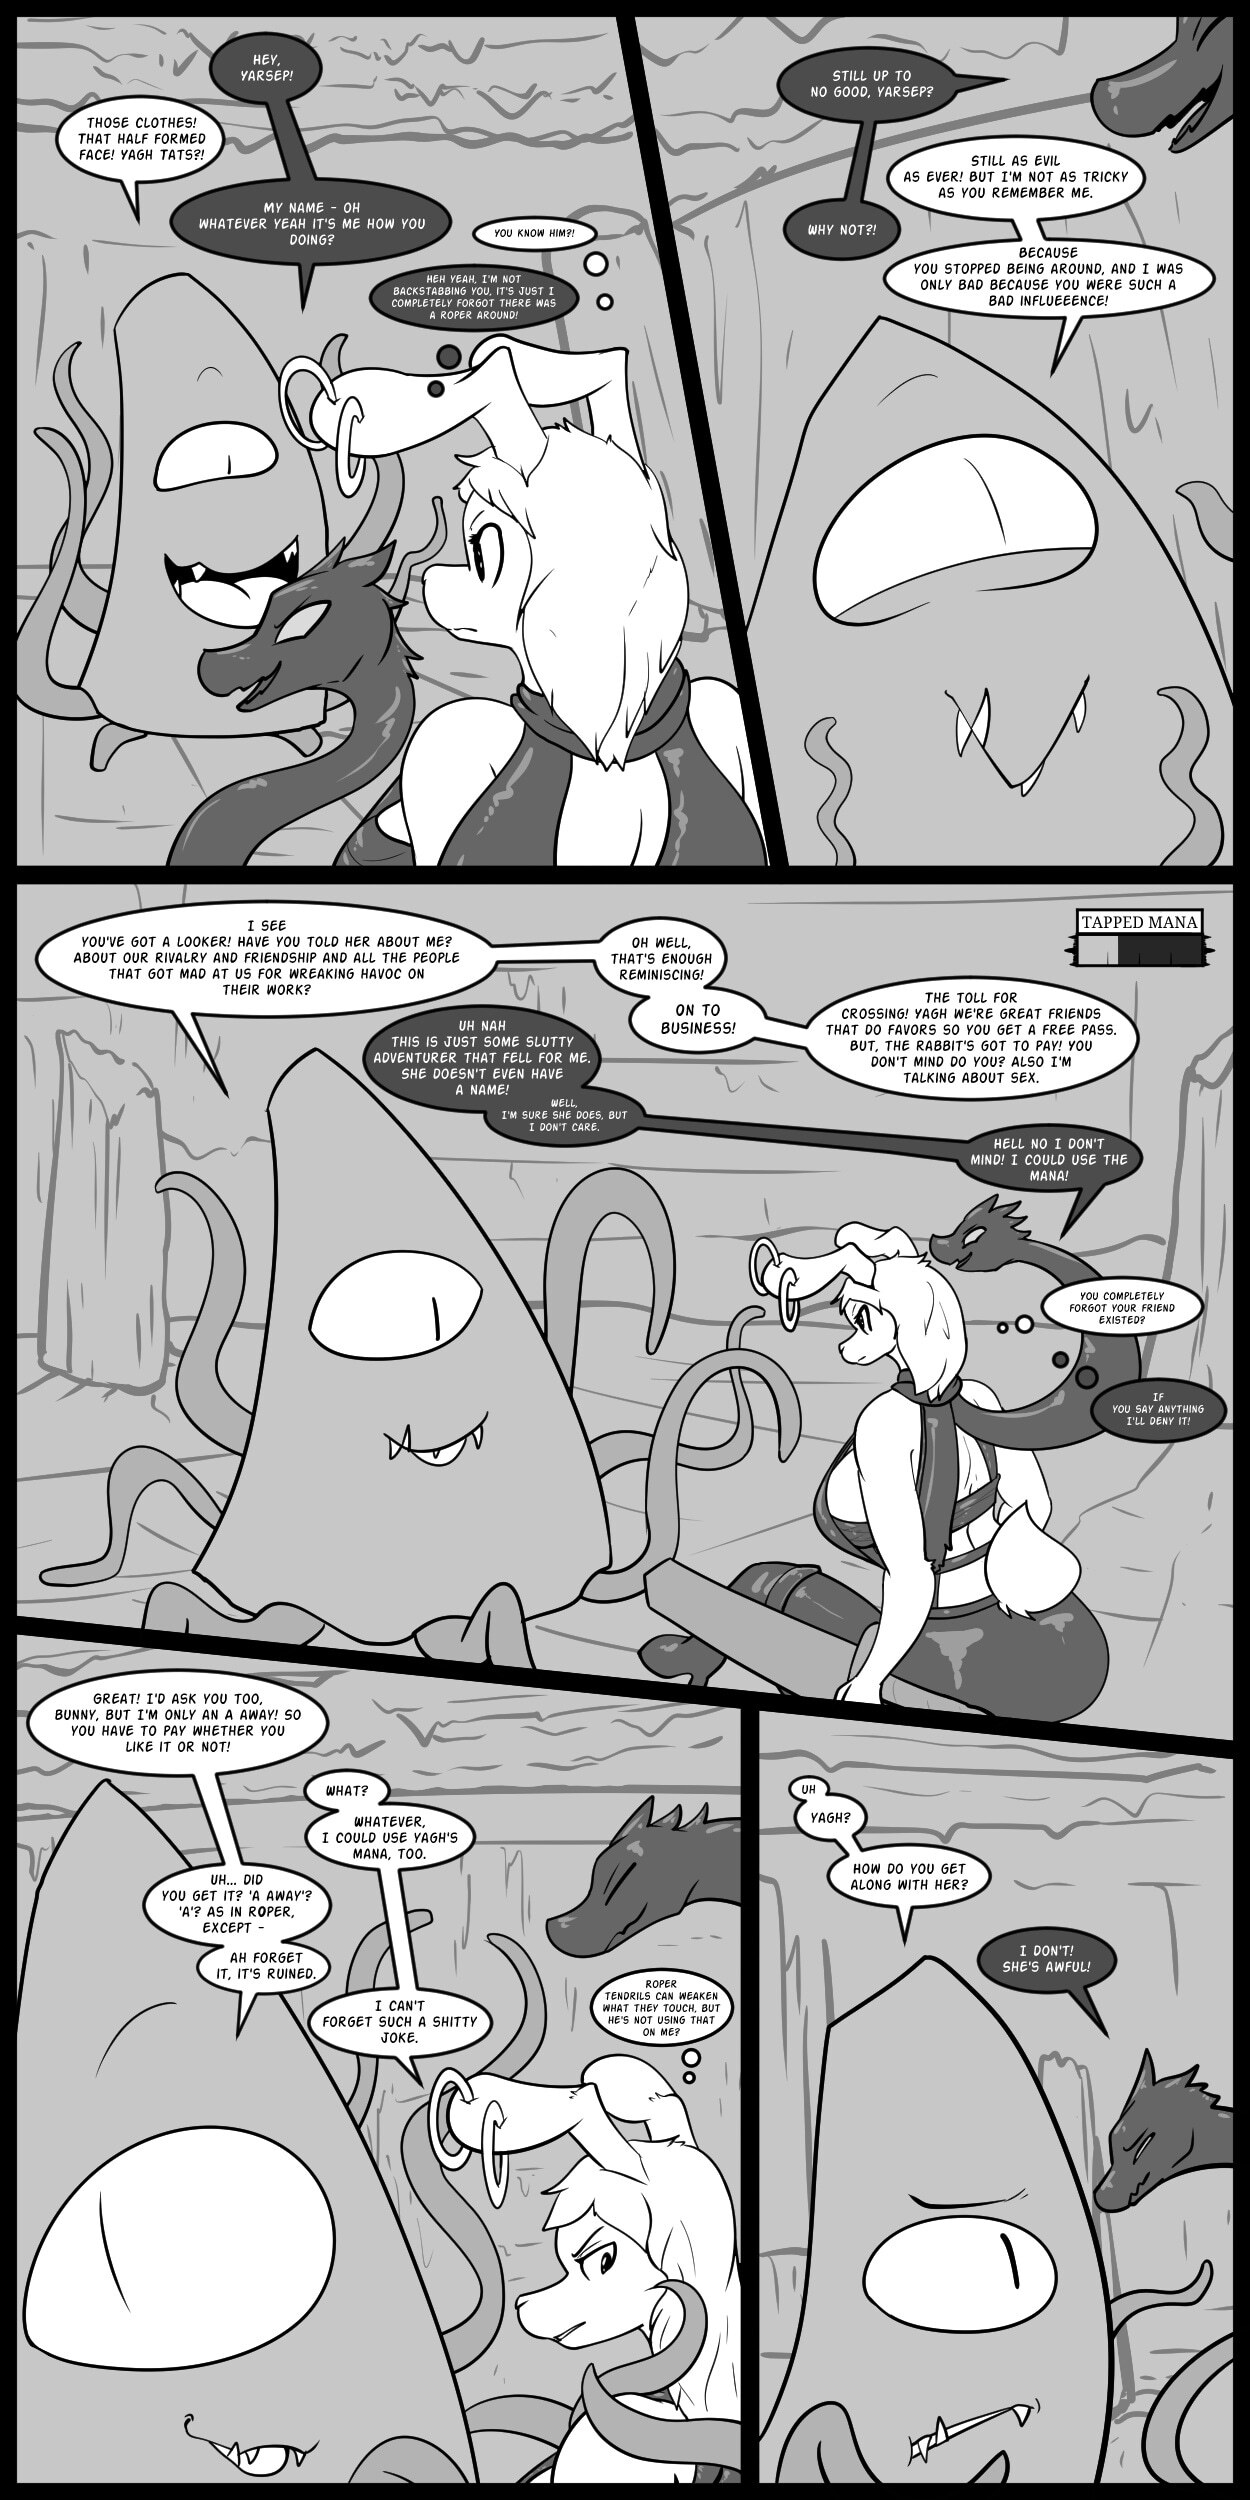 Rough Situation 2 - Page 5